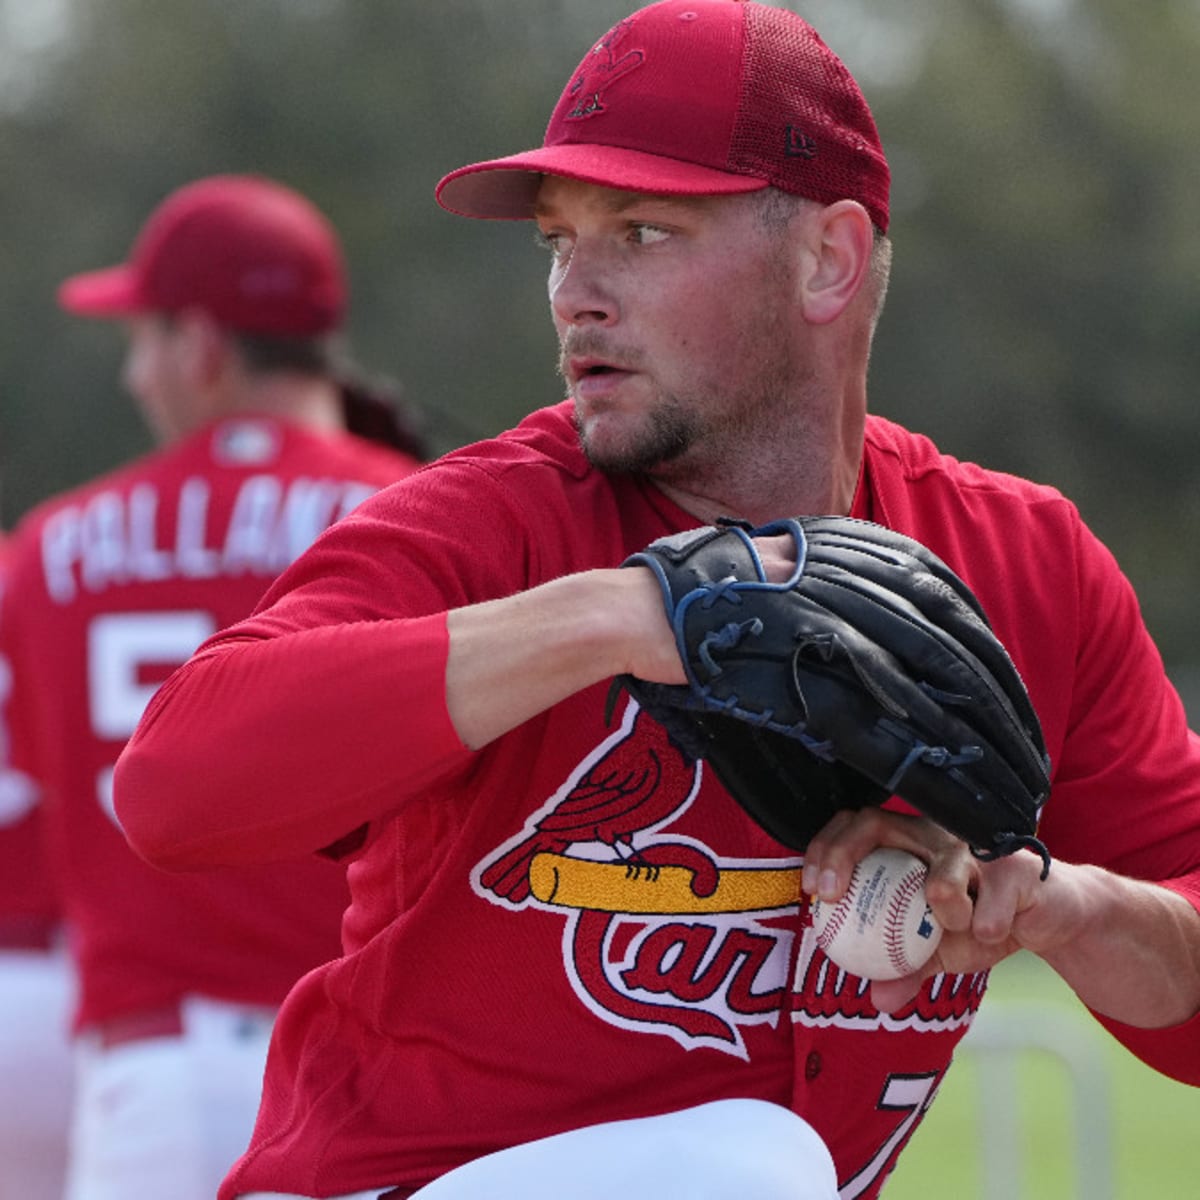 Yankees Claim Short-Lived Cardinals Pitcher As He Attempts To Make